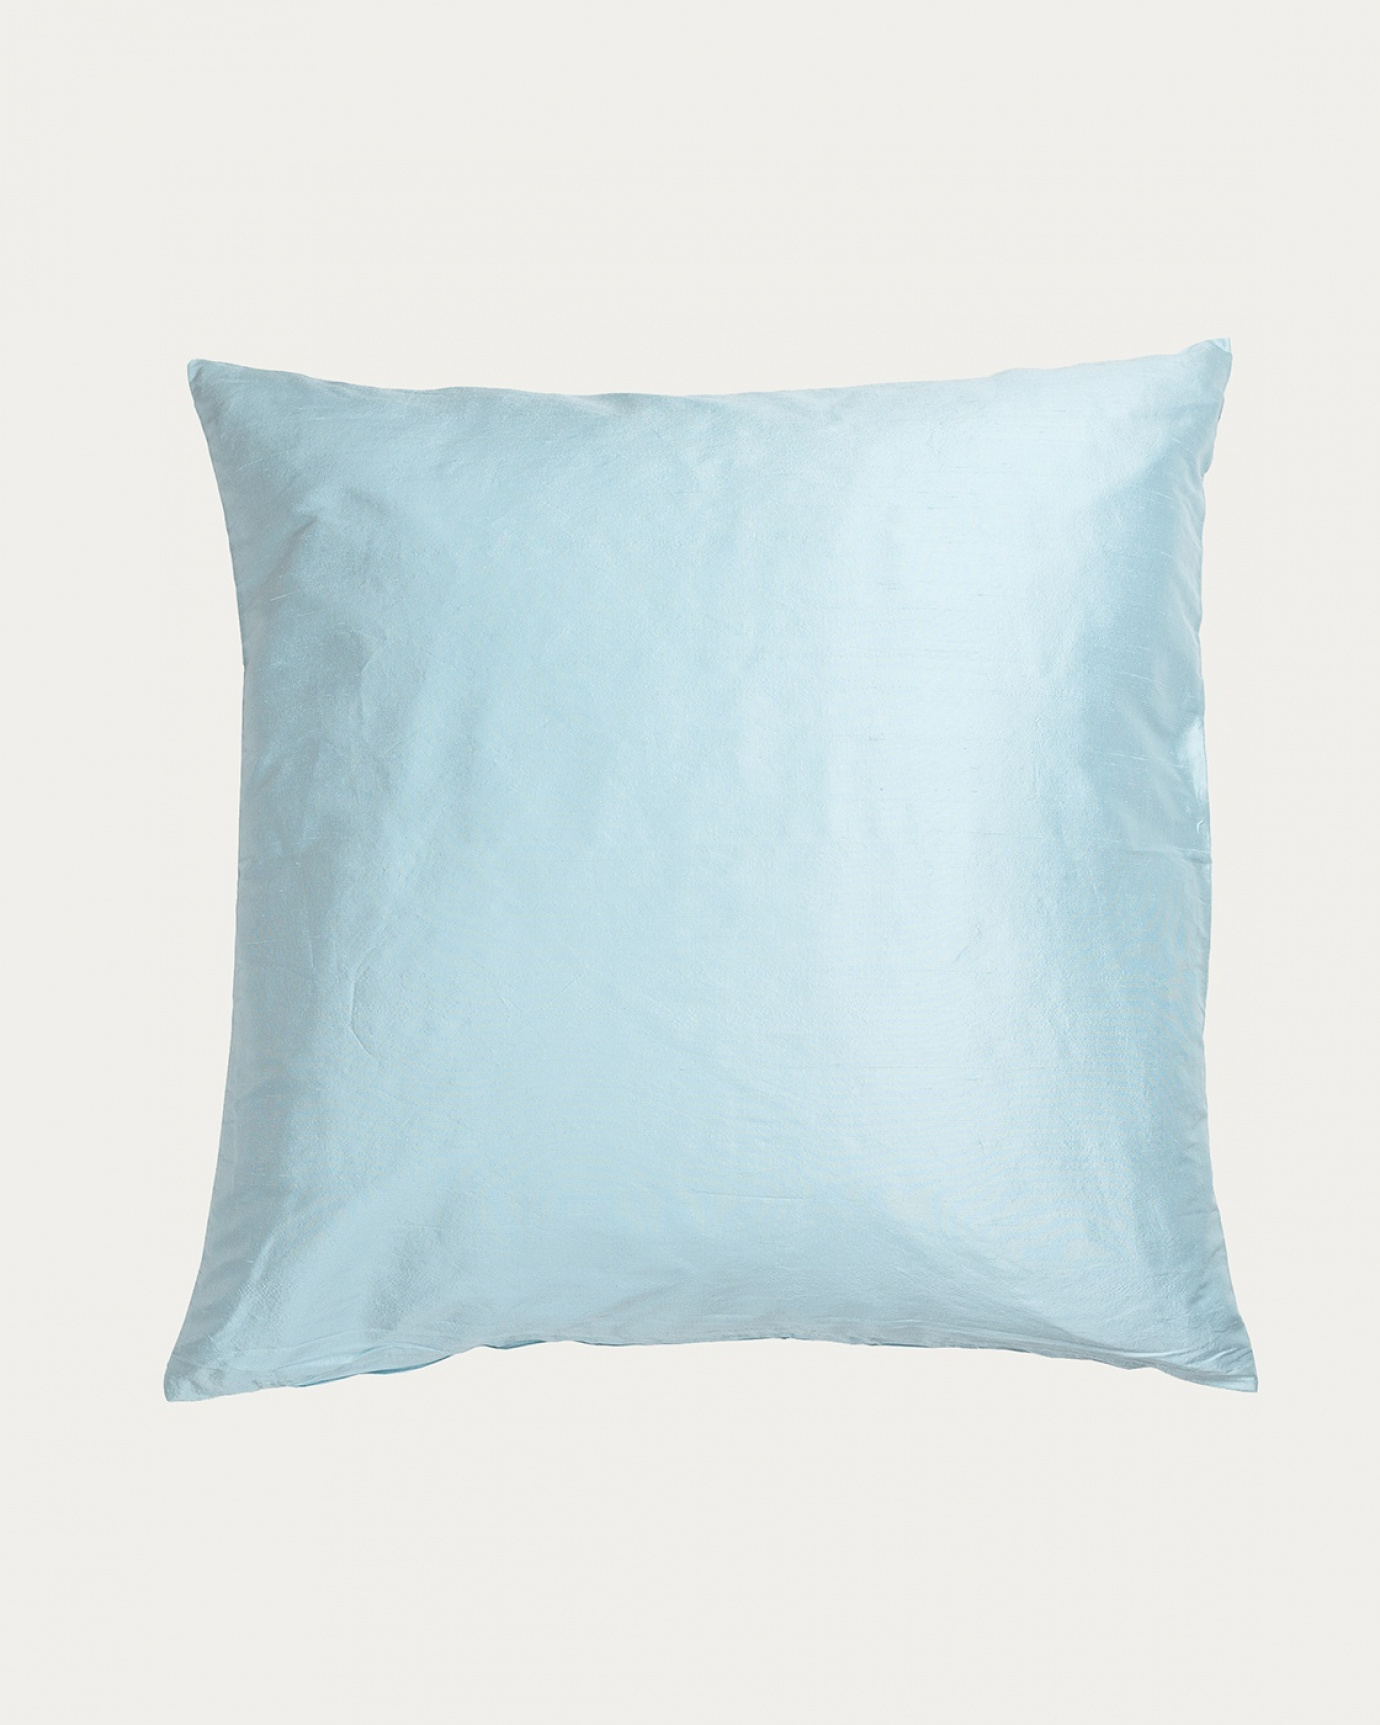 Product image baby blue DUPION cushion cover made of 100% dupion silk from LINUM DESIGN. Size 50x50 cm.